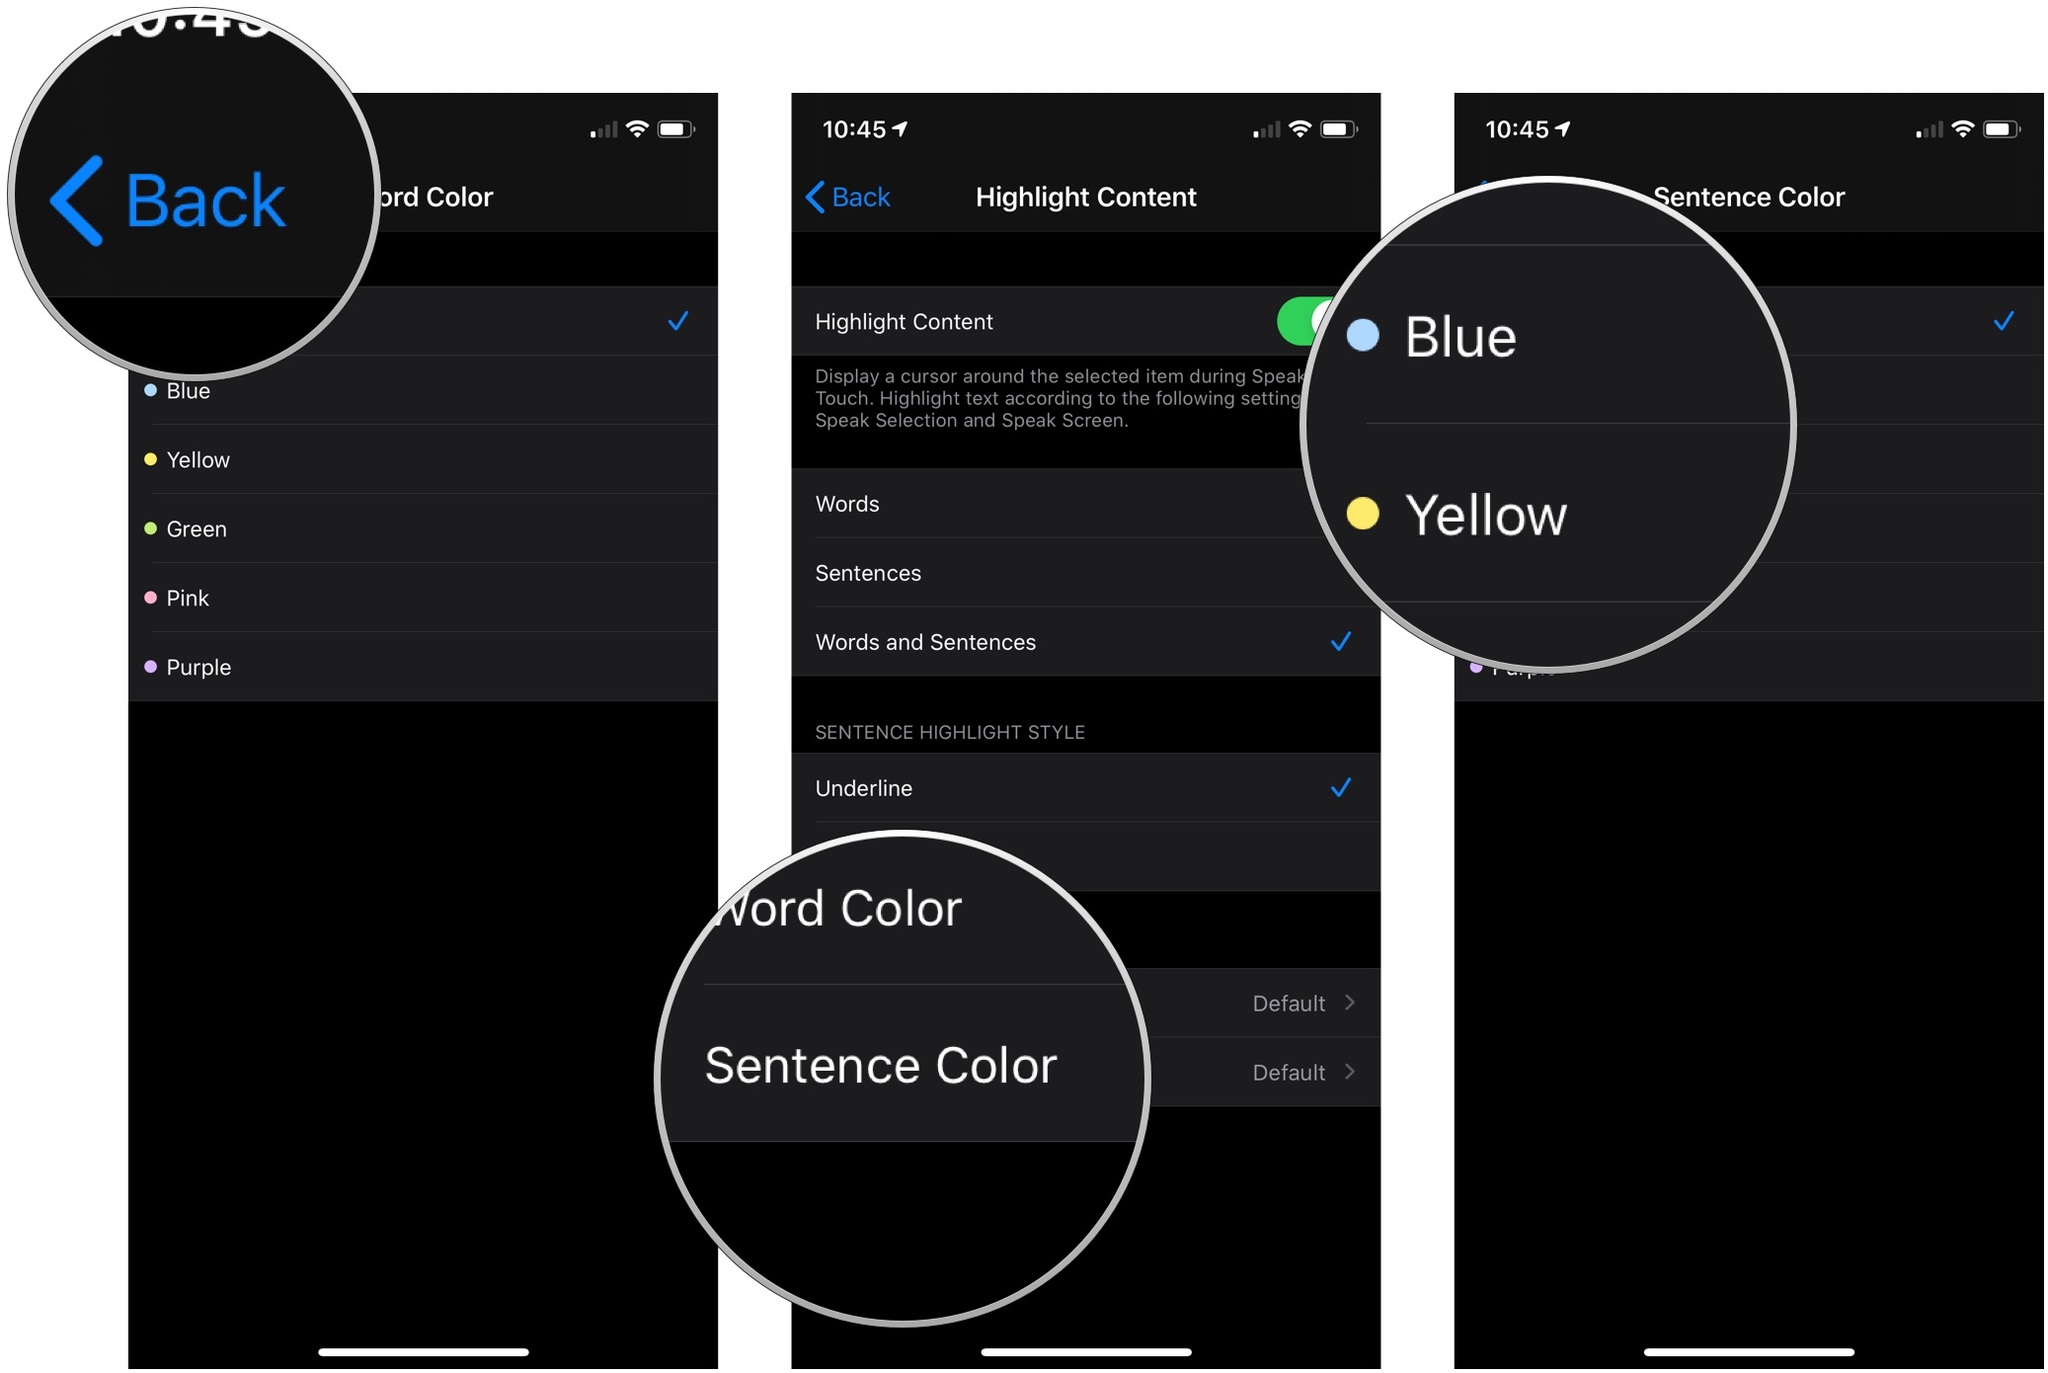 Enable highlight content with spoken text showing how to tap Back, then tap Sentence Color, then tap a color